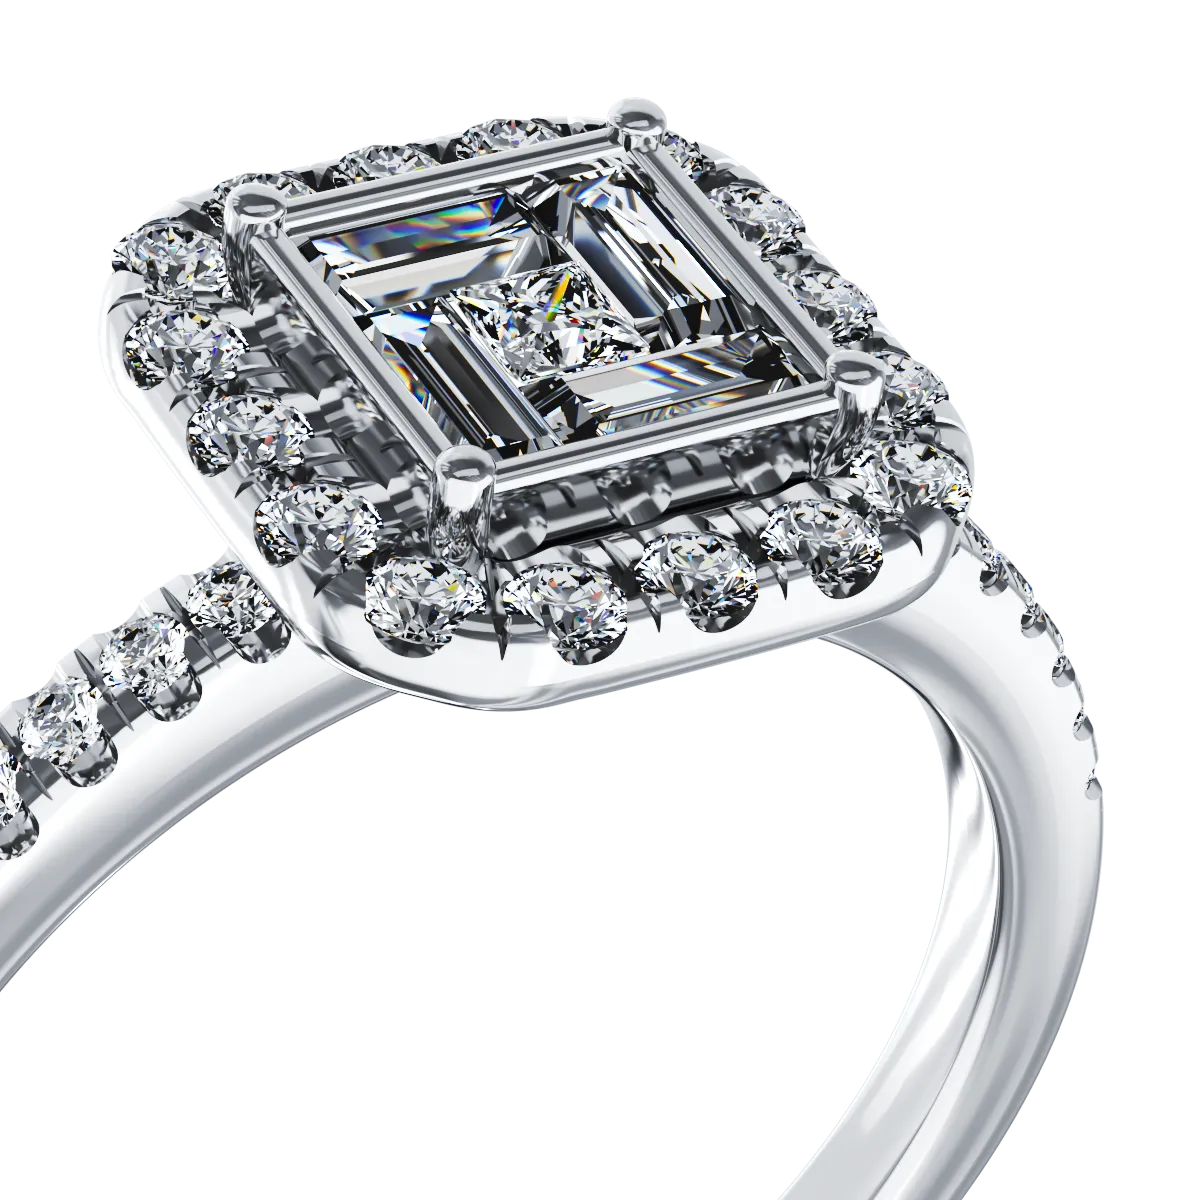 18K white gold engagement ring with diamonds of 0.44ct